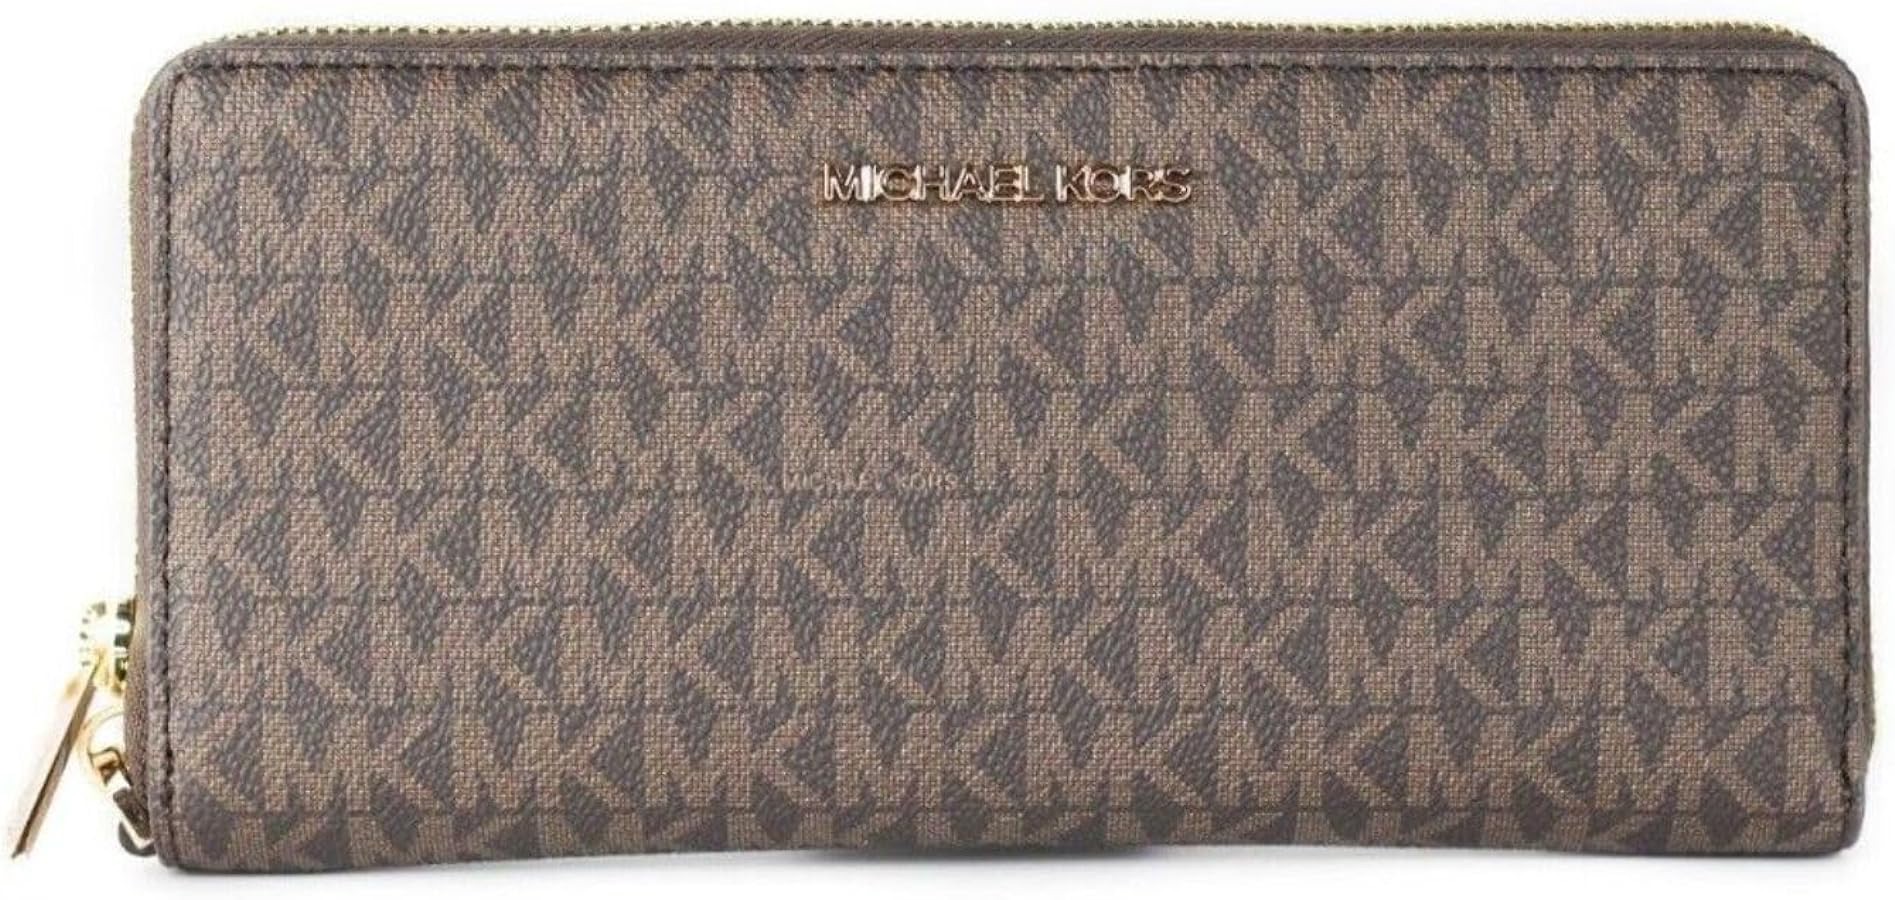 Amazon.com: Michael Kors Women's Zip Around, Brown 2019, Large Sized Purse Wallet : Clothing, Shoes & Jewelry